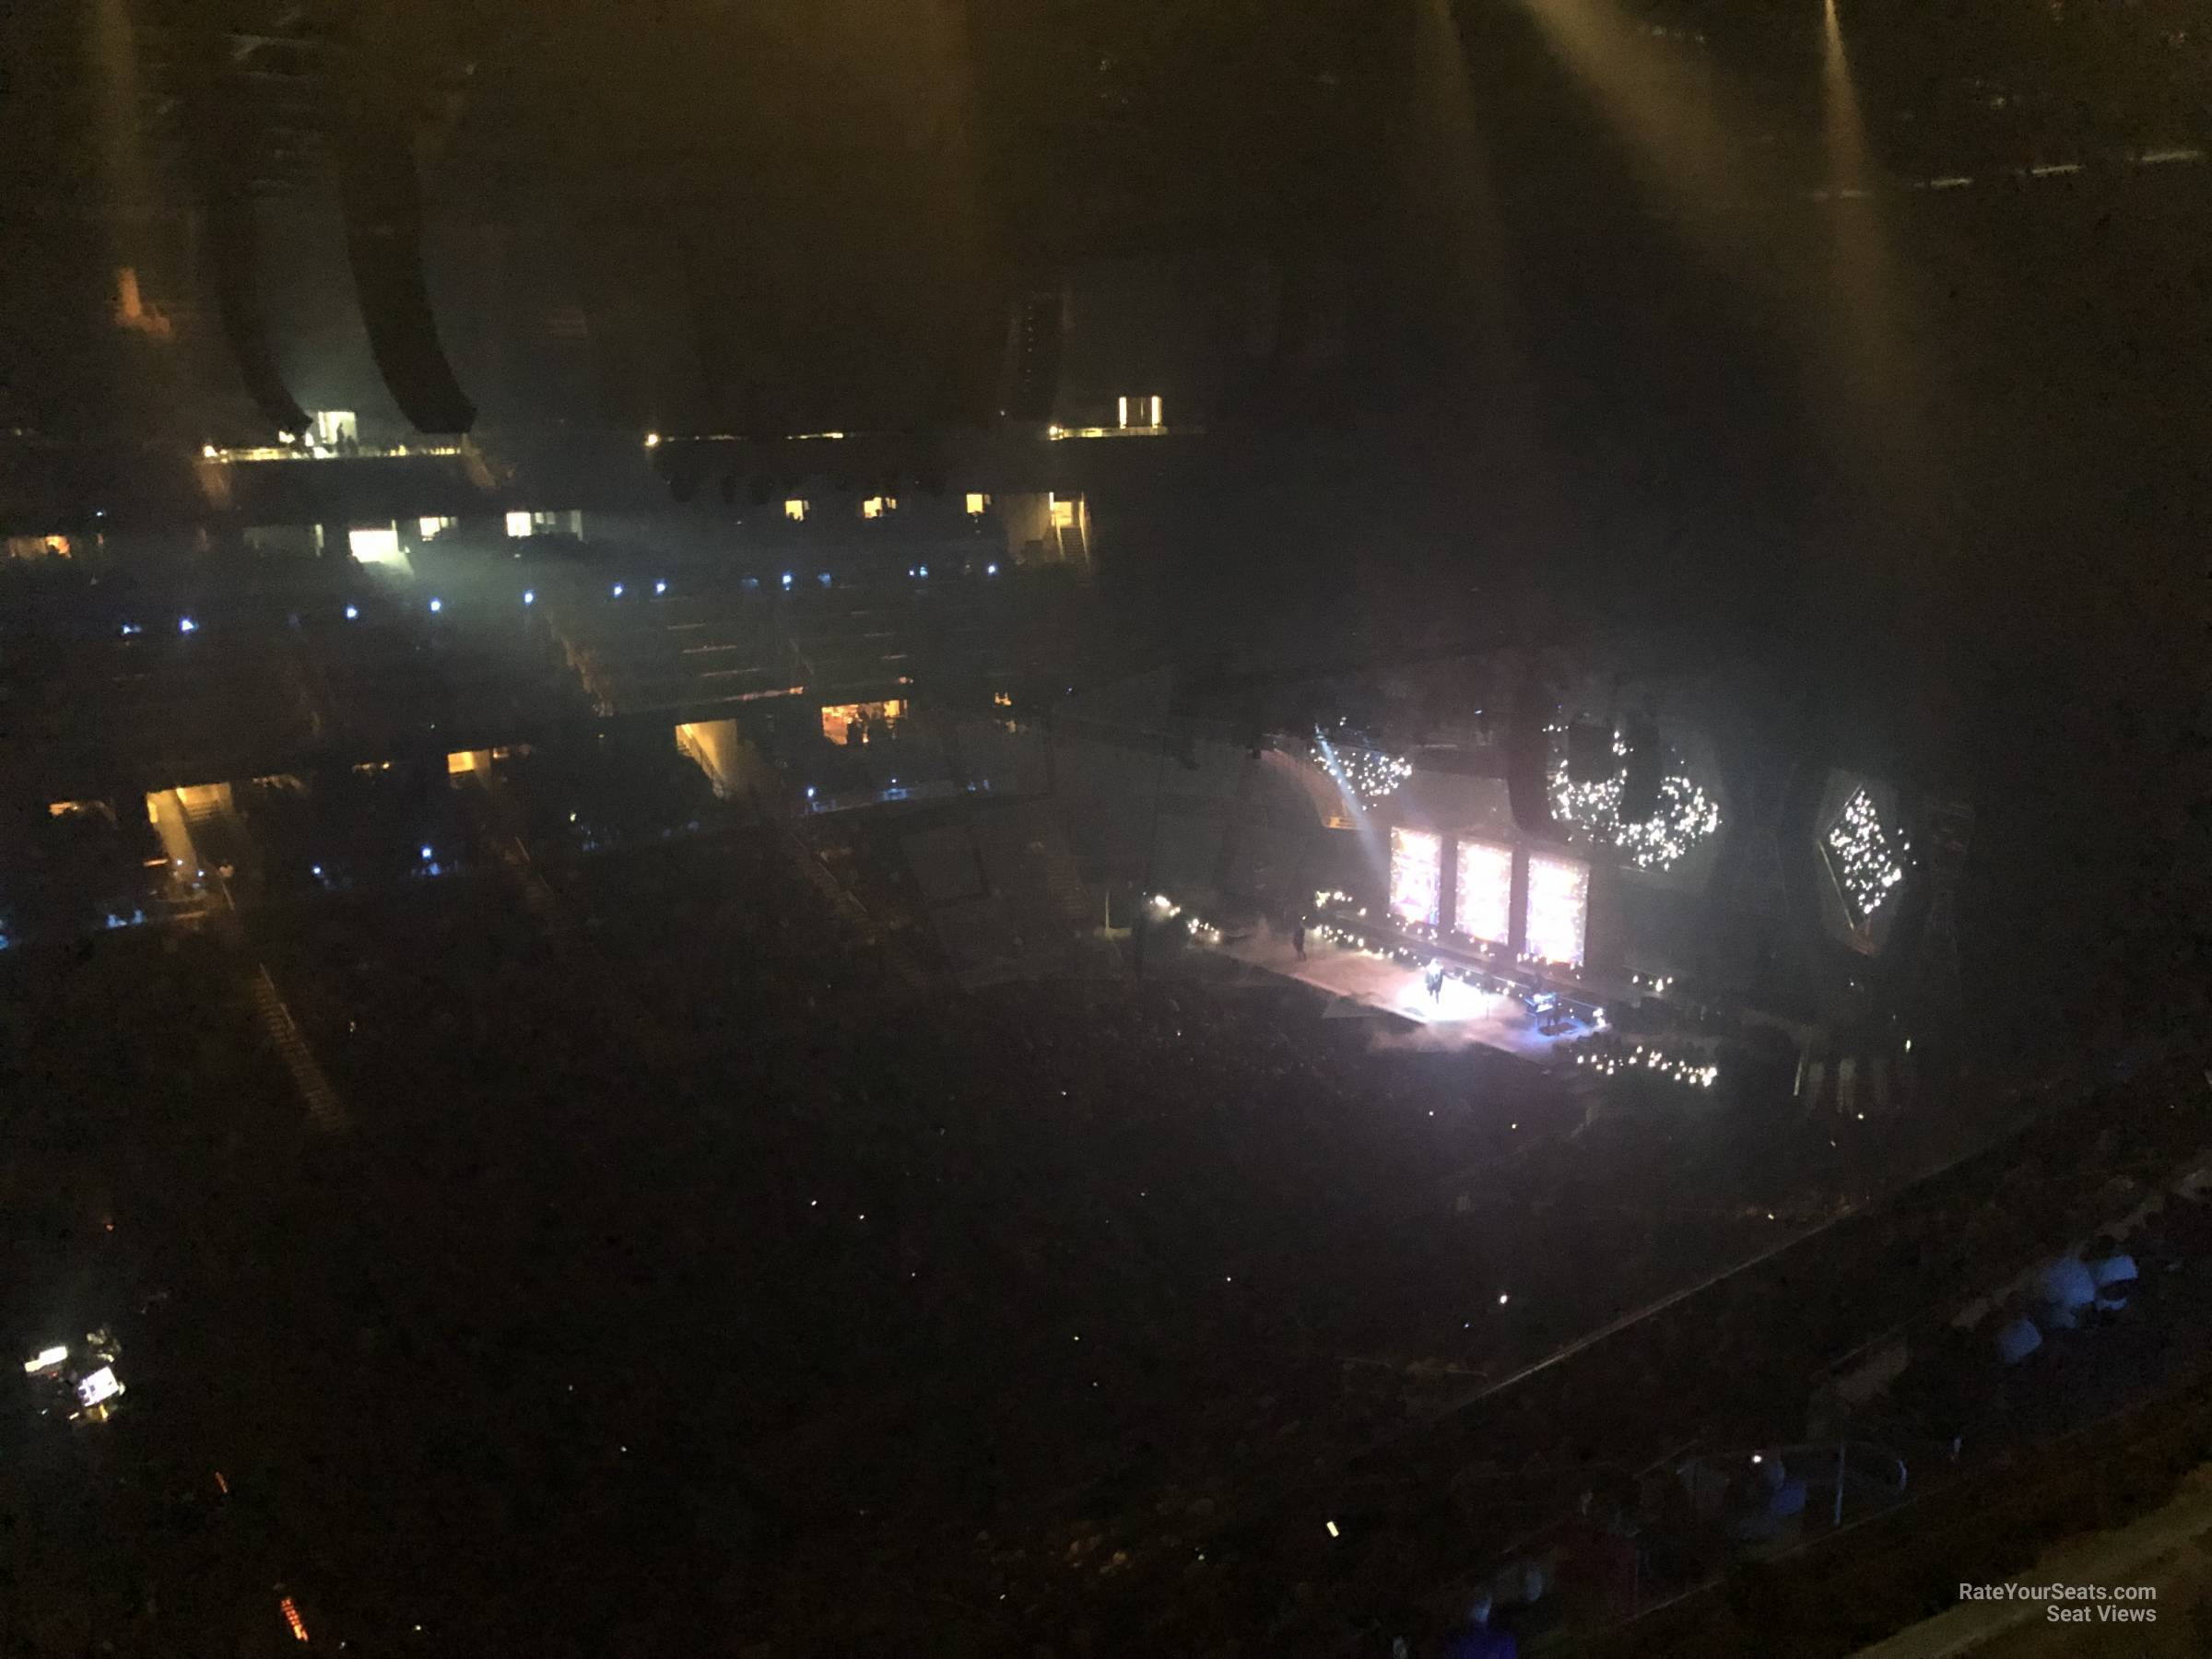 section 211, row 3 seat view  for concert - amway center